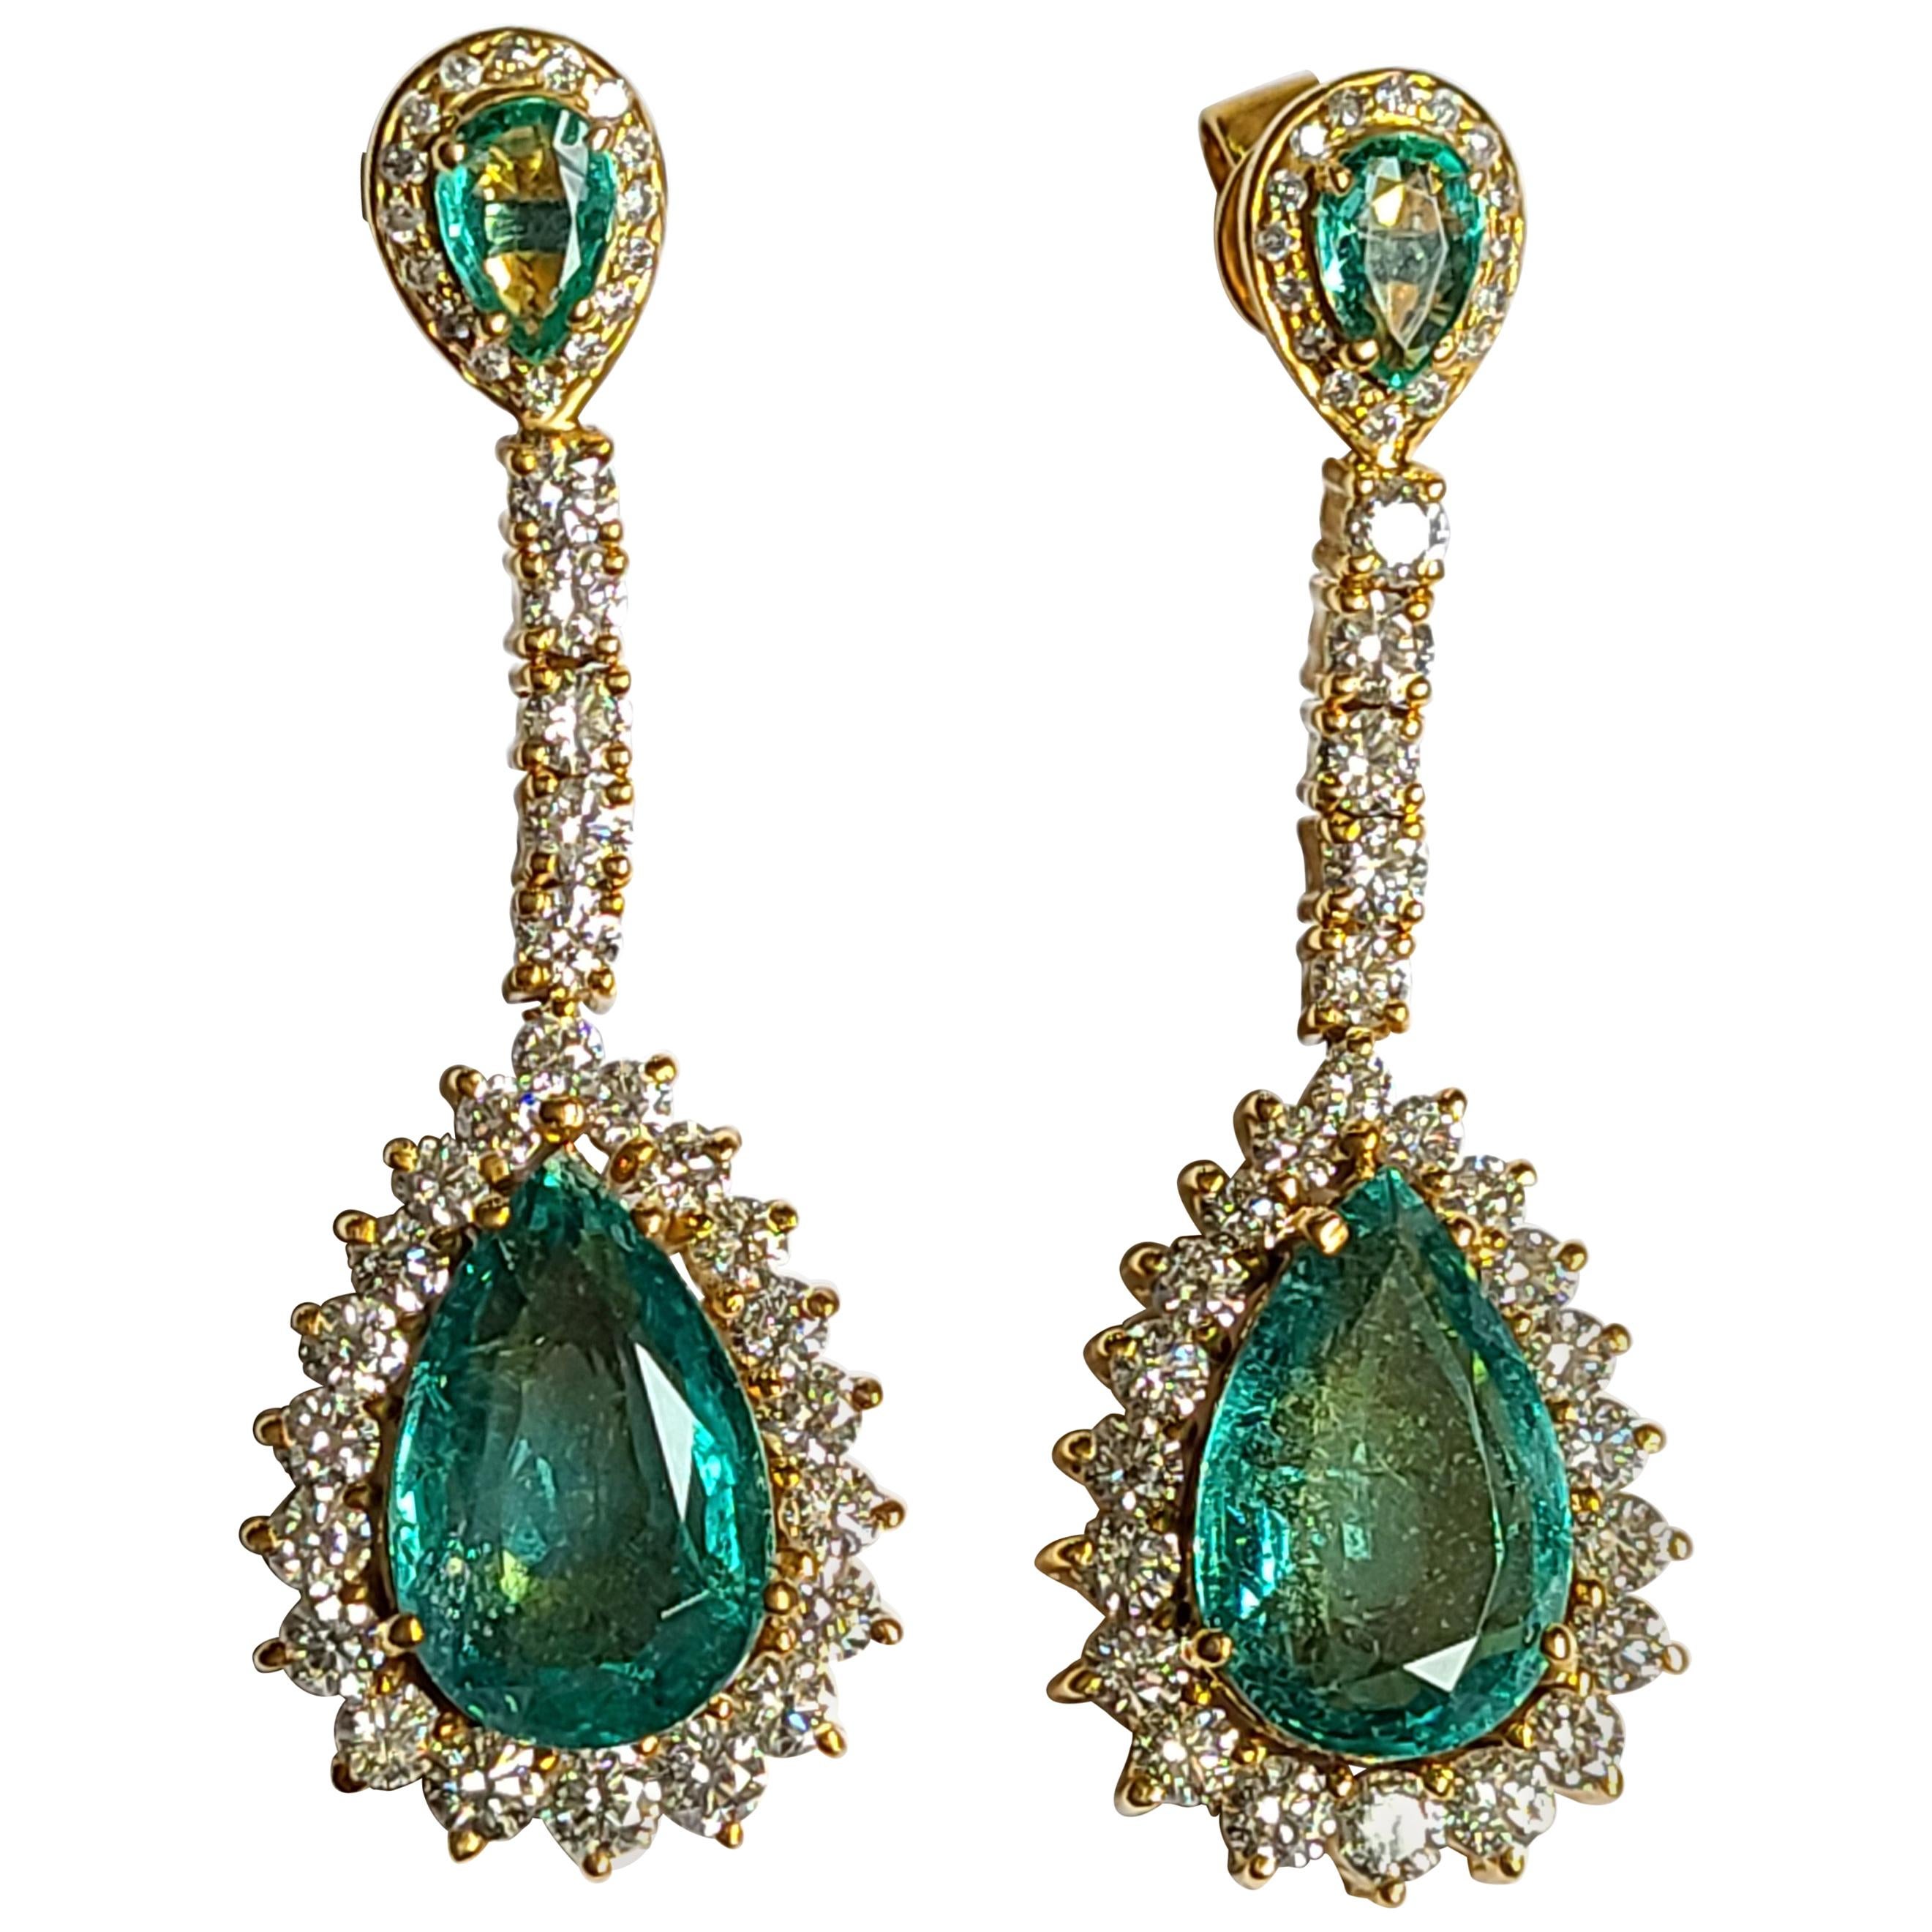 Natural Emerald Earrings Set in 18 Karat Gold with Diamonds